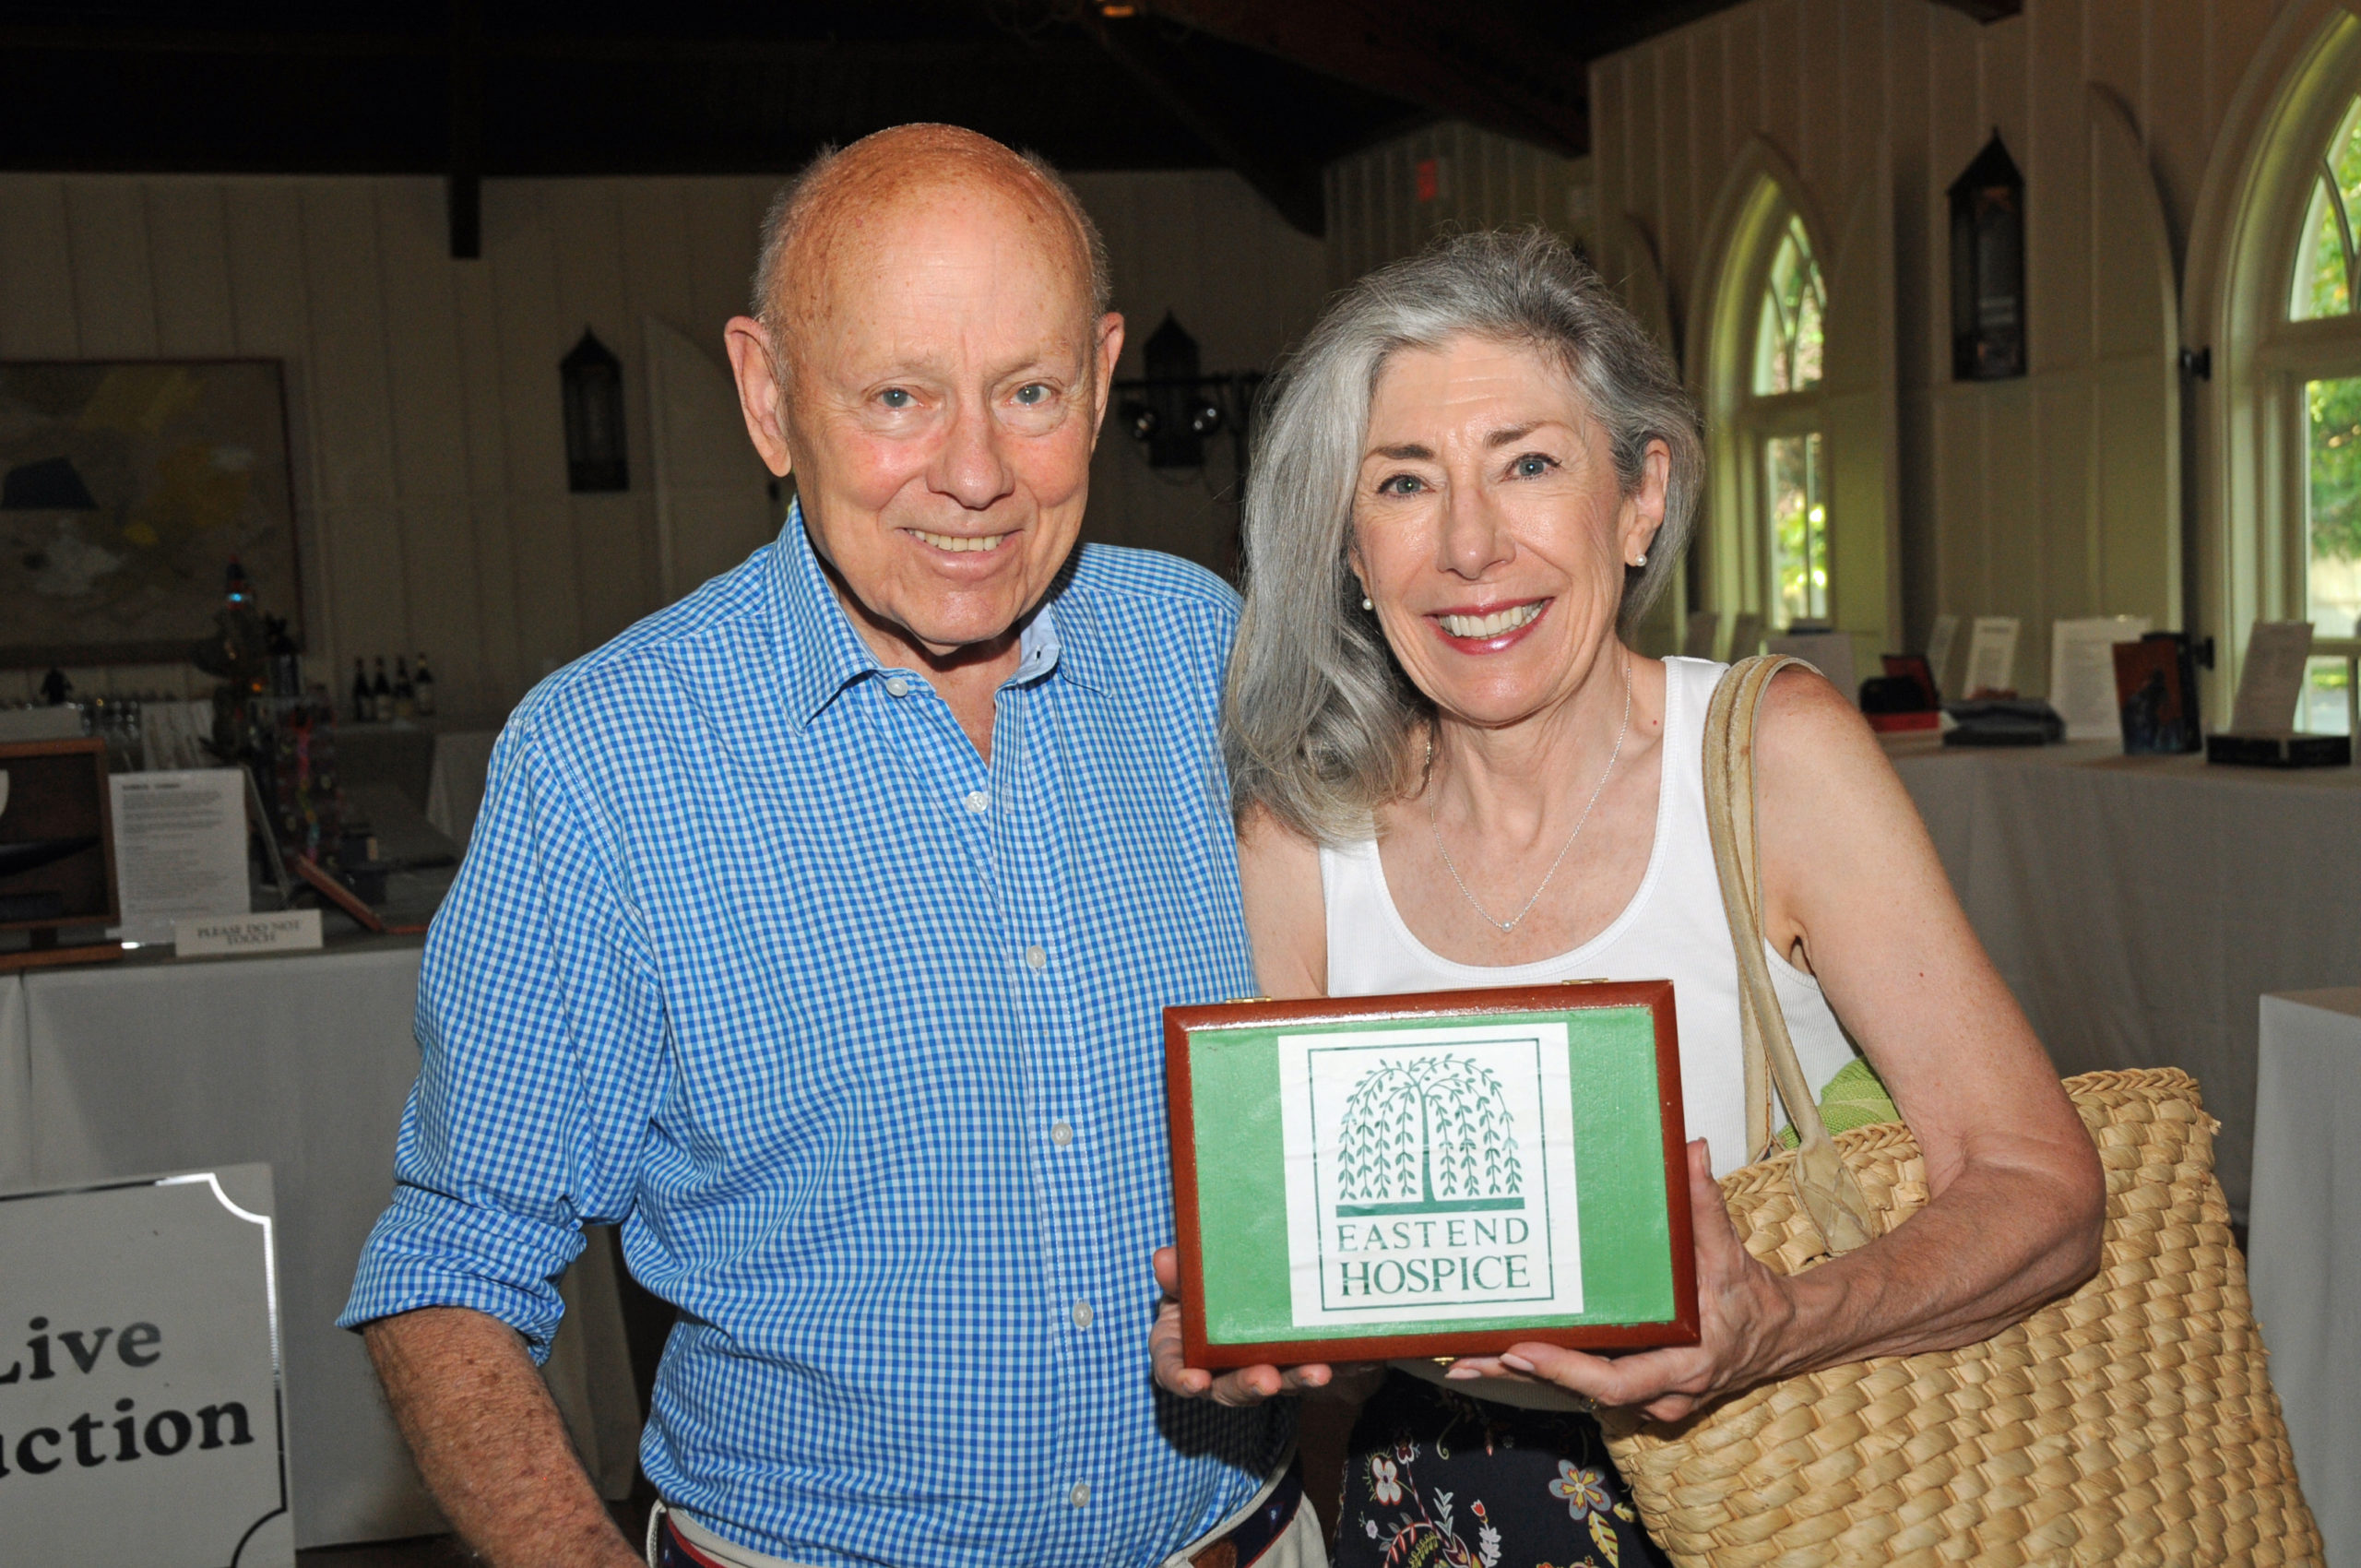 Ted David and Louise Merriman at the East End Hospice Art Box Auction preview on Thursday evening at at Hoie Hall in St. Luke's Episcopal Church in East Hampton. More than 80 decorated boxes were auctioned on Saturday to benefit East End Hospice.    RICHARD LEWIN